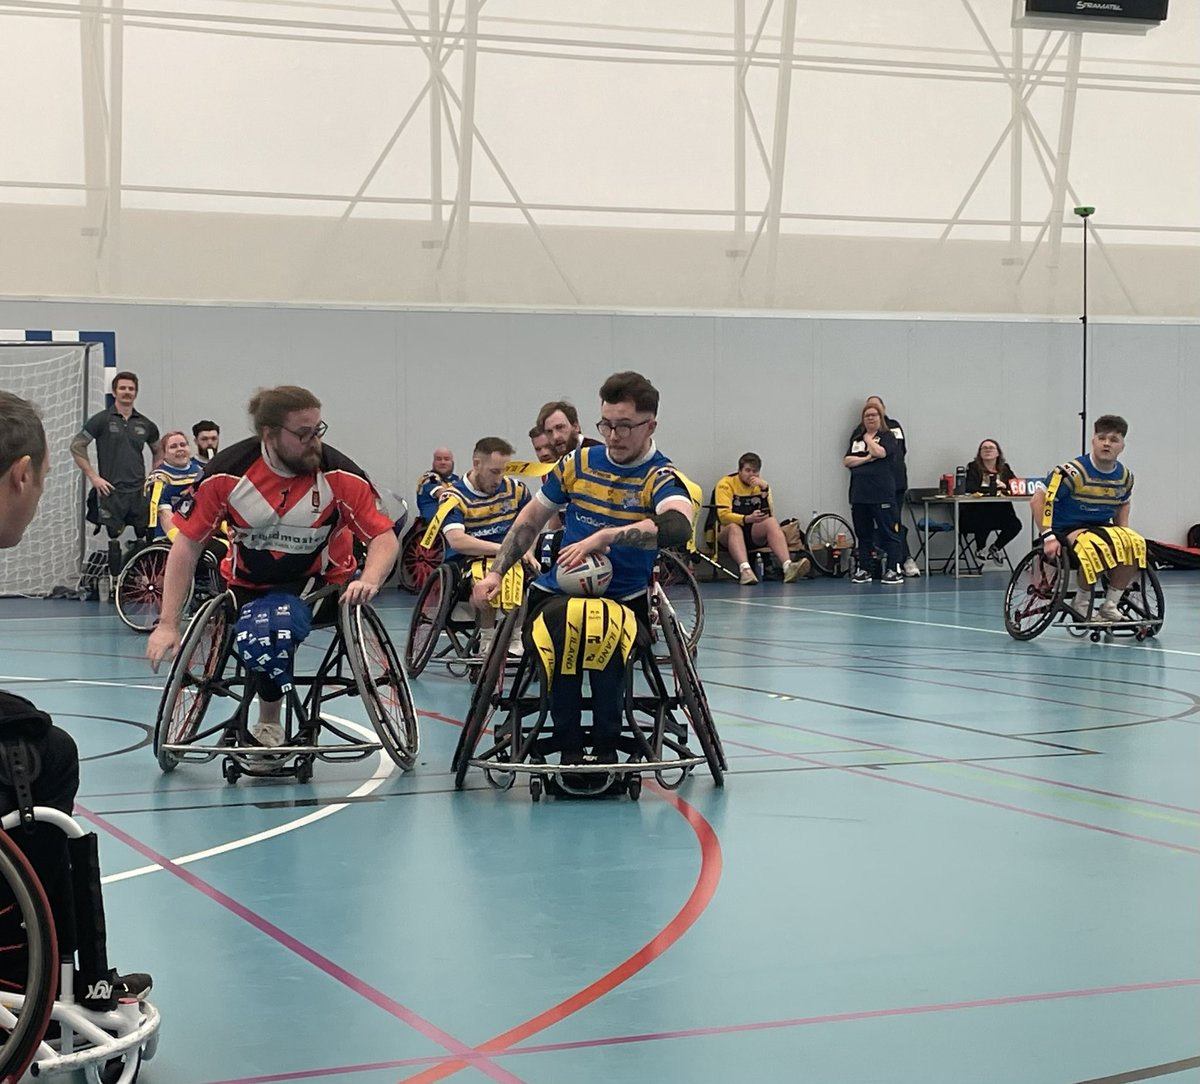 Great afternoon watching the @RugbyLeeds Wheelchair team securing their place in the Semi-Finals of the Challenge Cup….well done guys 👏👏👏 #TeamRhinos 🦏💙💛 xx @leedsrhinos